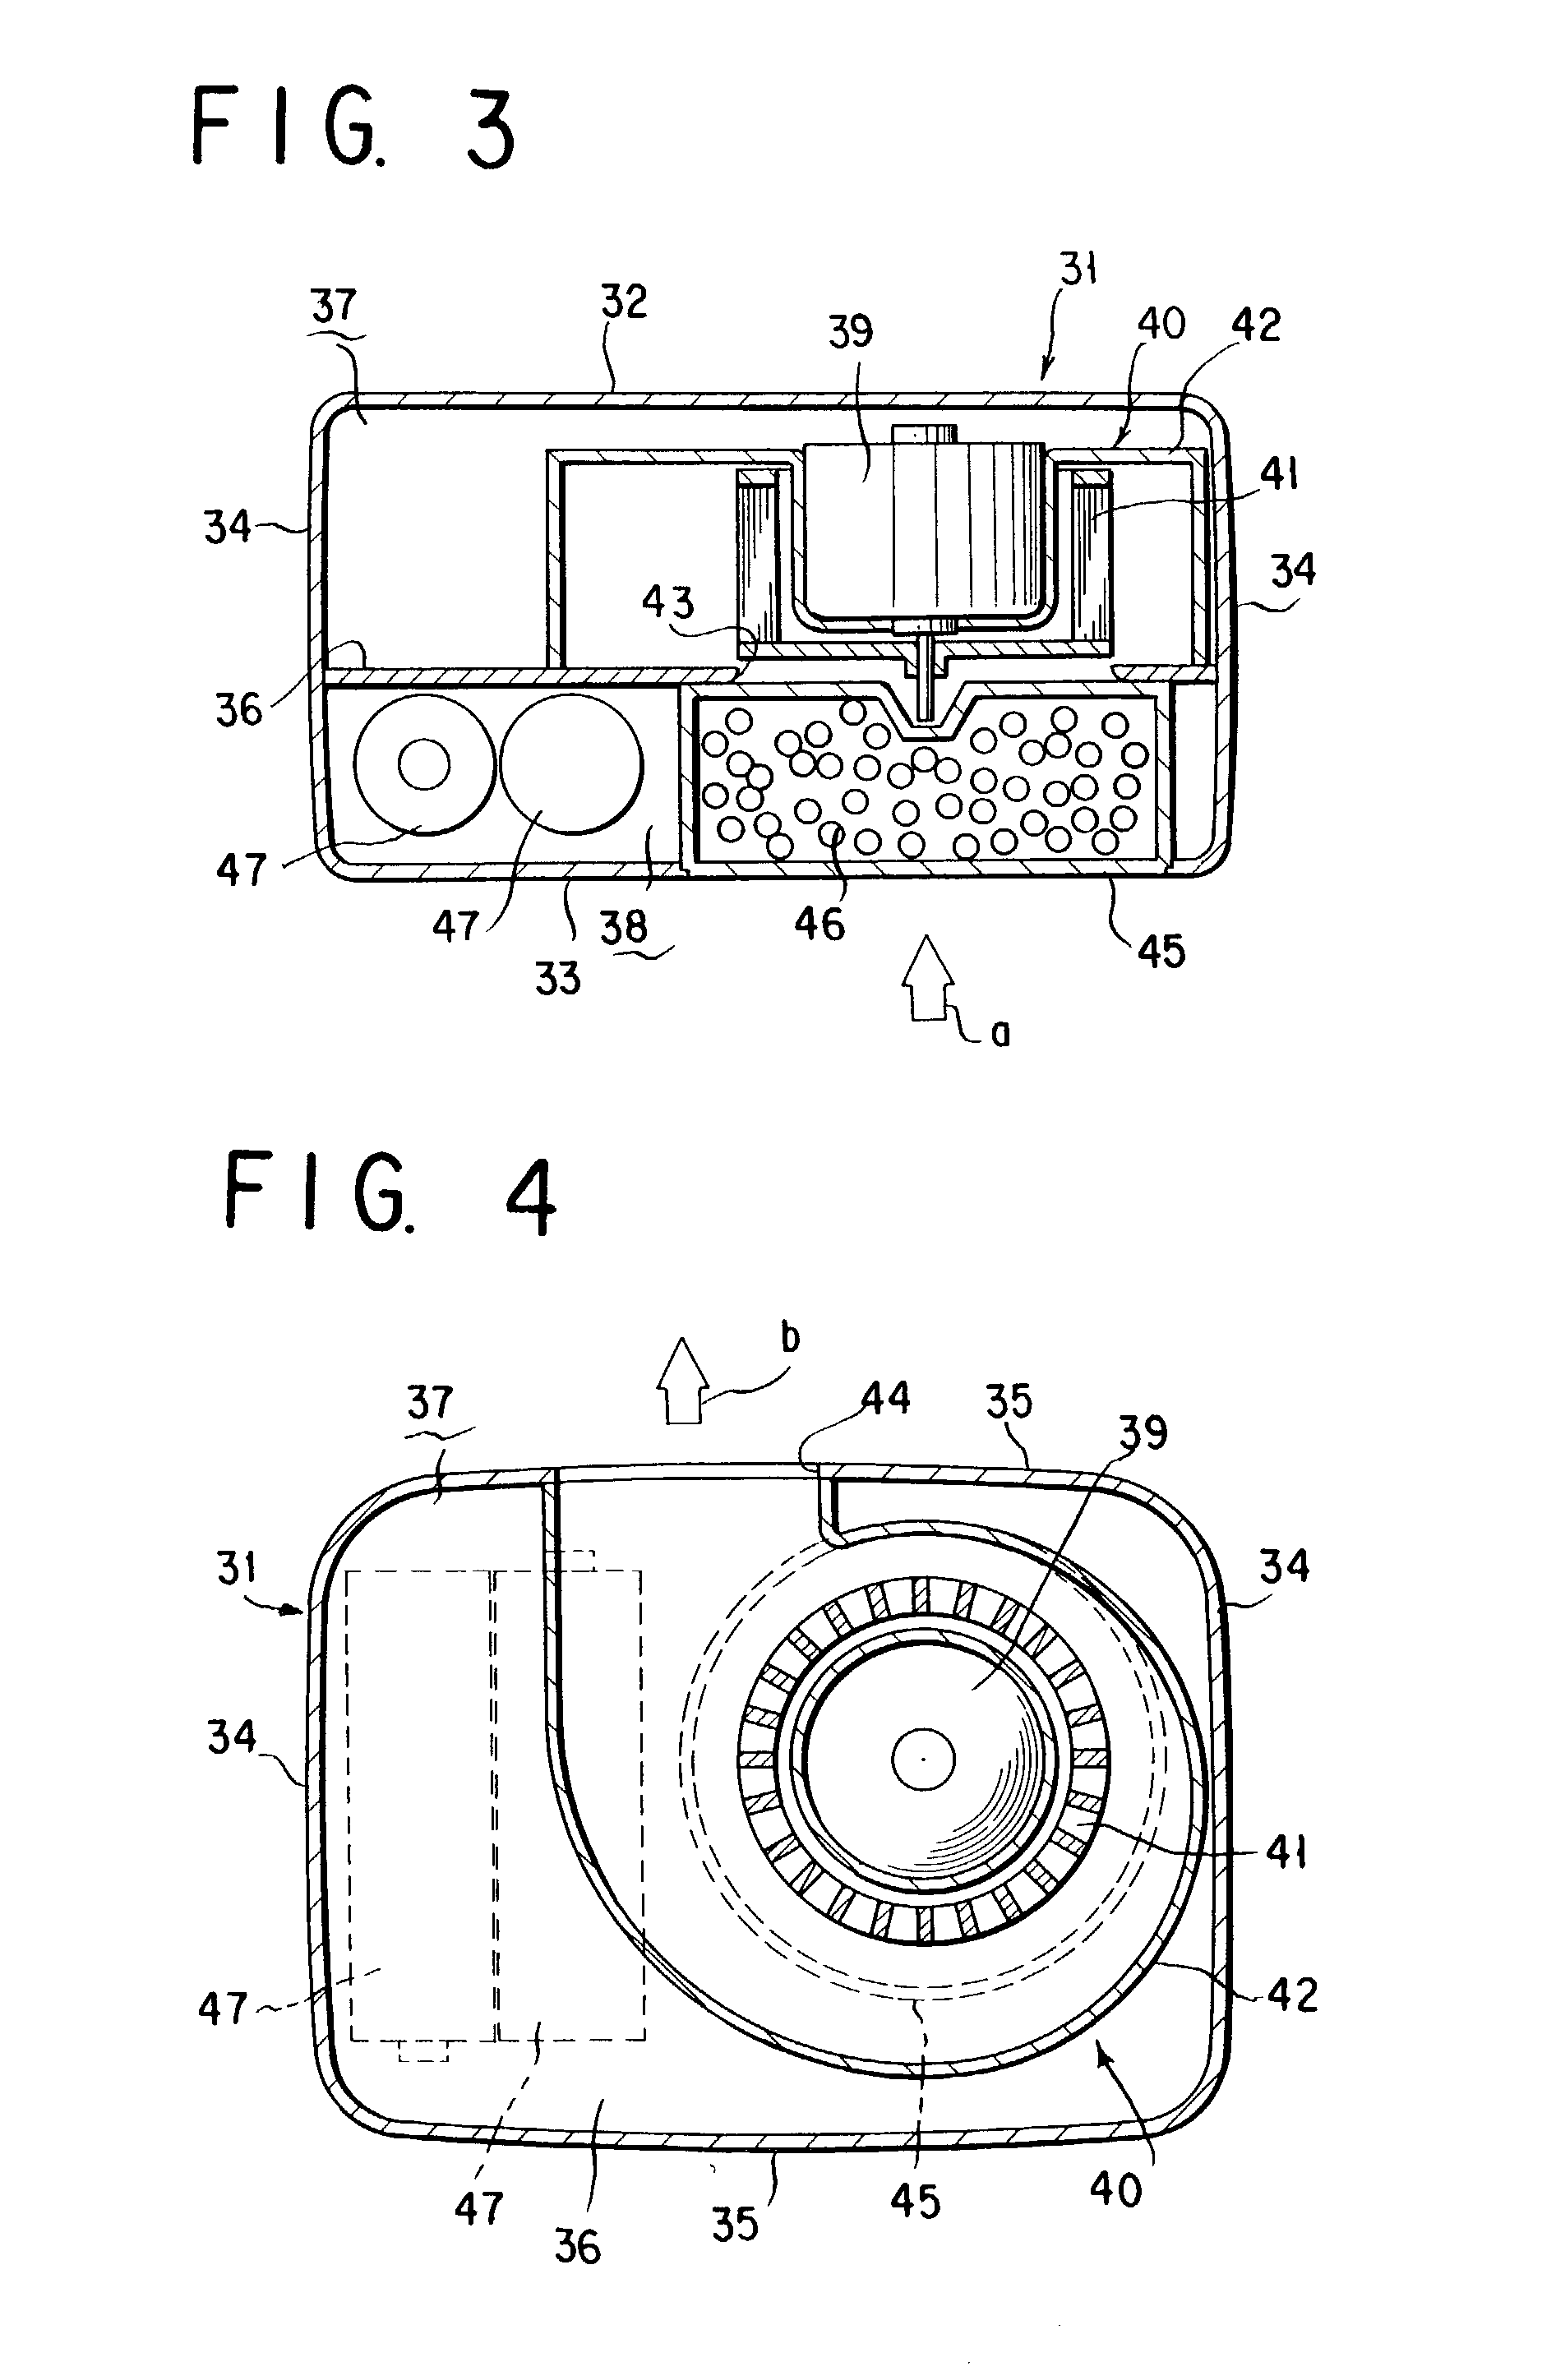 Fan type chemicals diffusing device